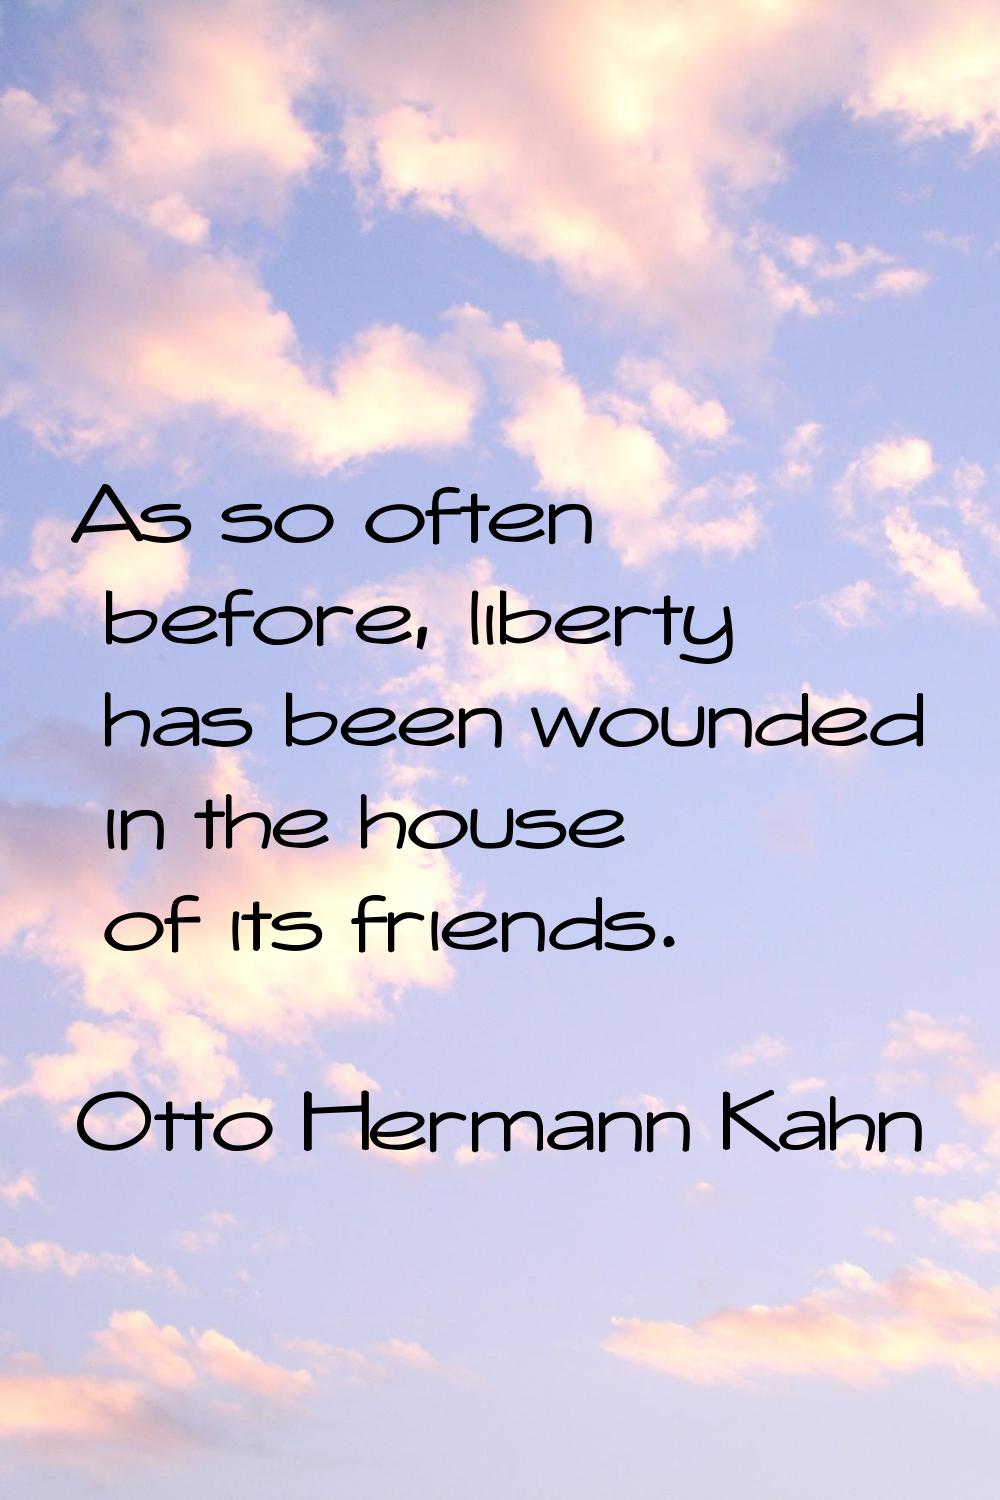 As so often before, liberty has been wounded in the house of its friends.